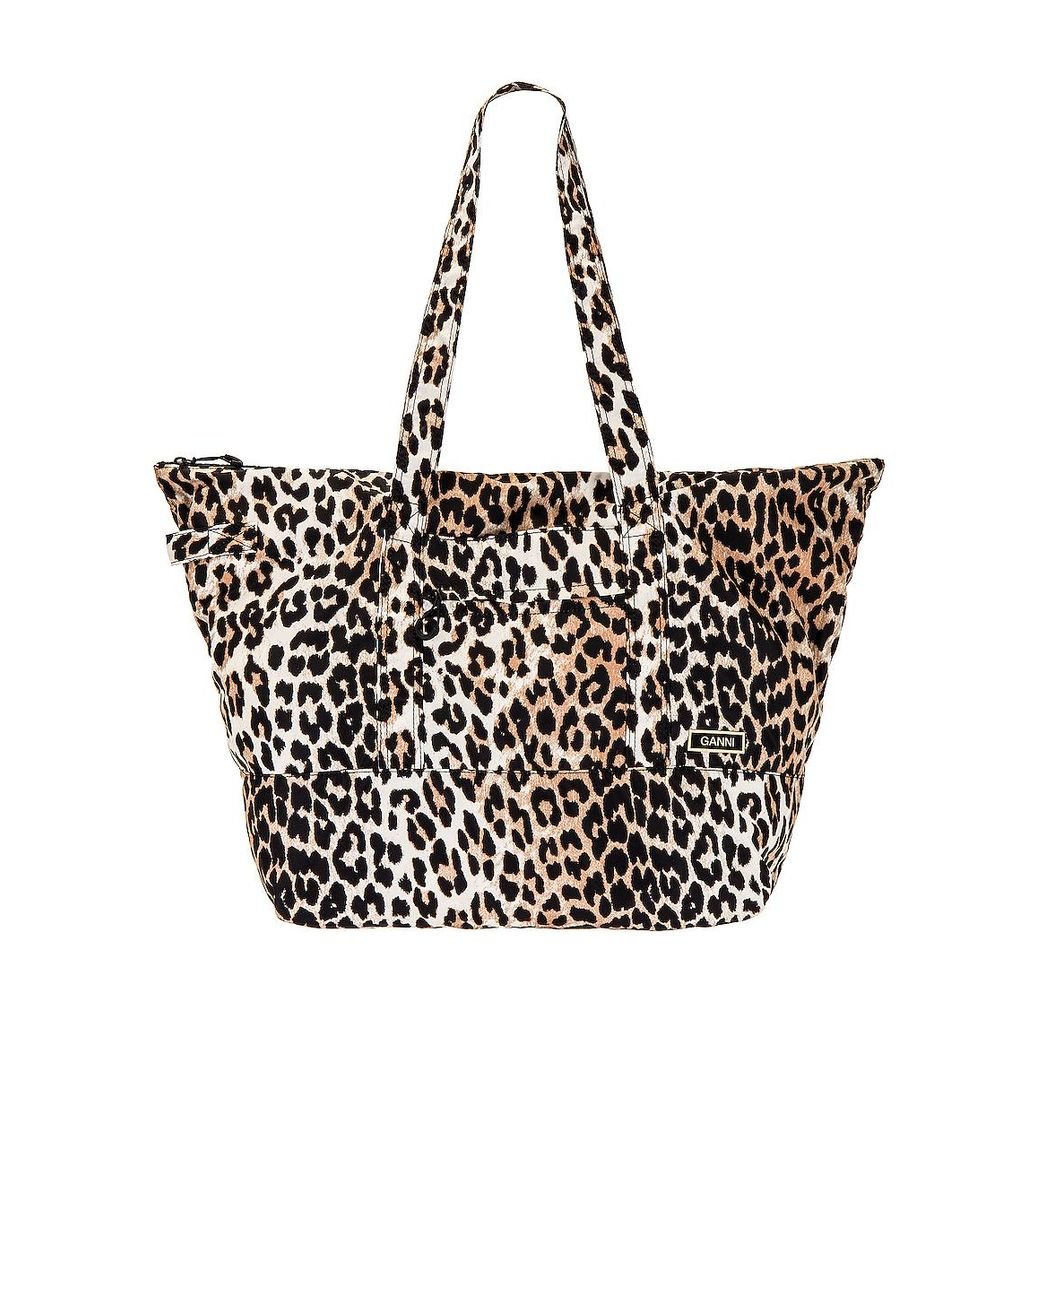 Ganni Packable Tote in Leopard (Black) - Lyst